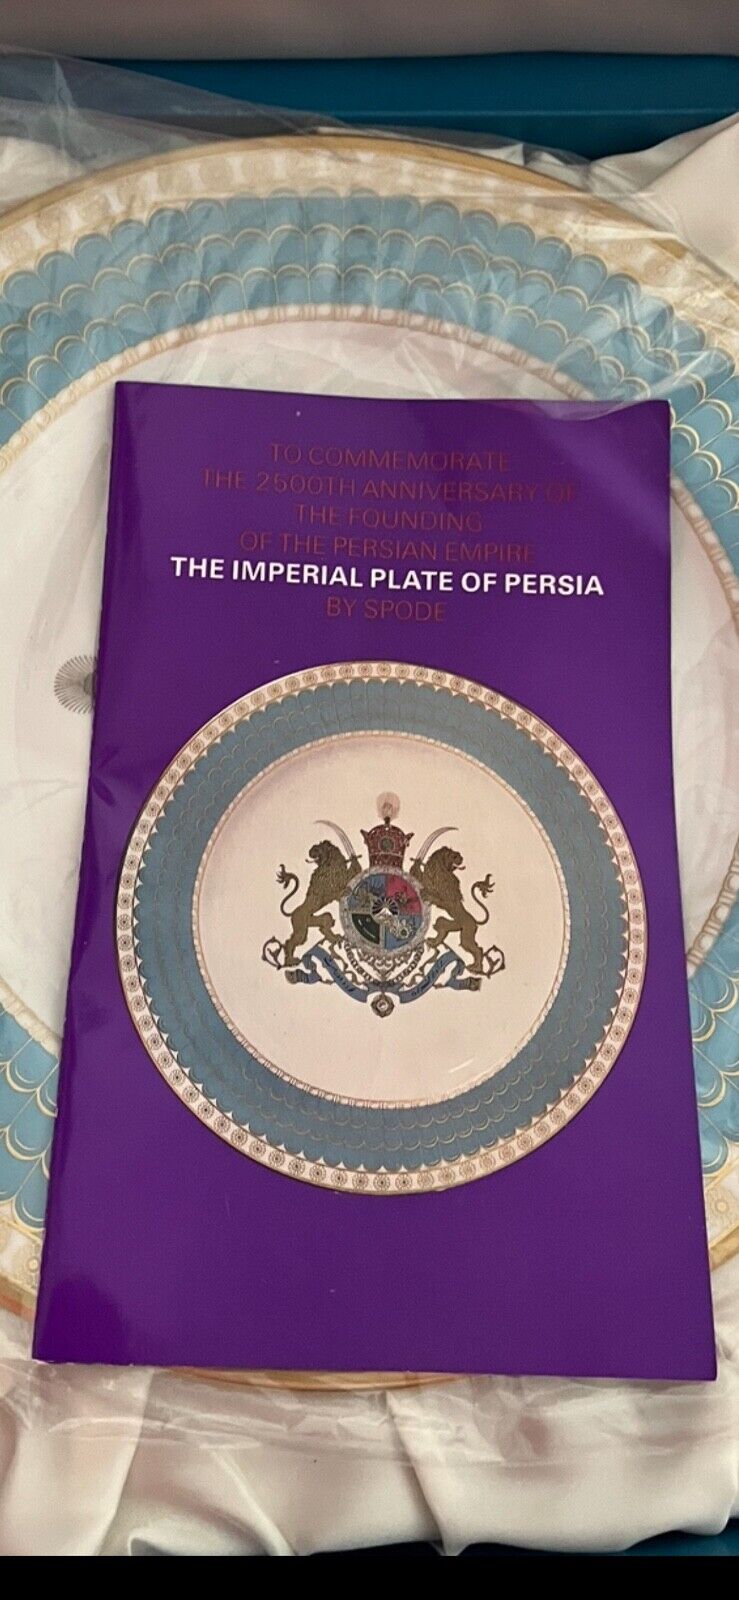 LE SPODE “THE IMPERIAL PLATE OF PERSIA” 1971 Limited Number